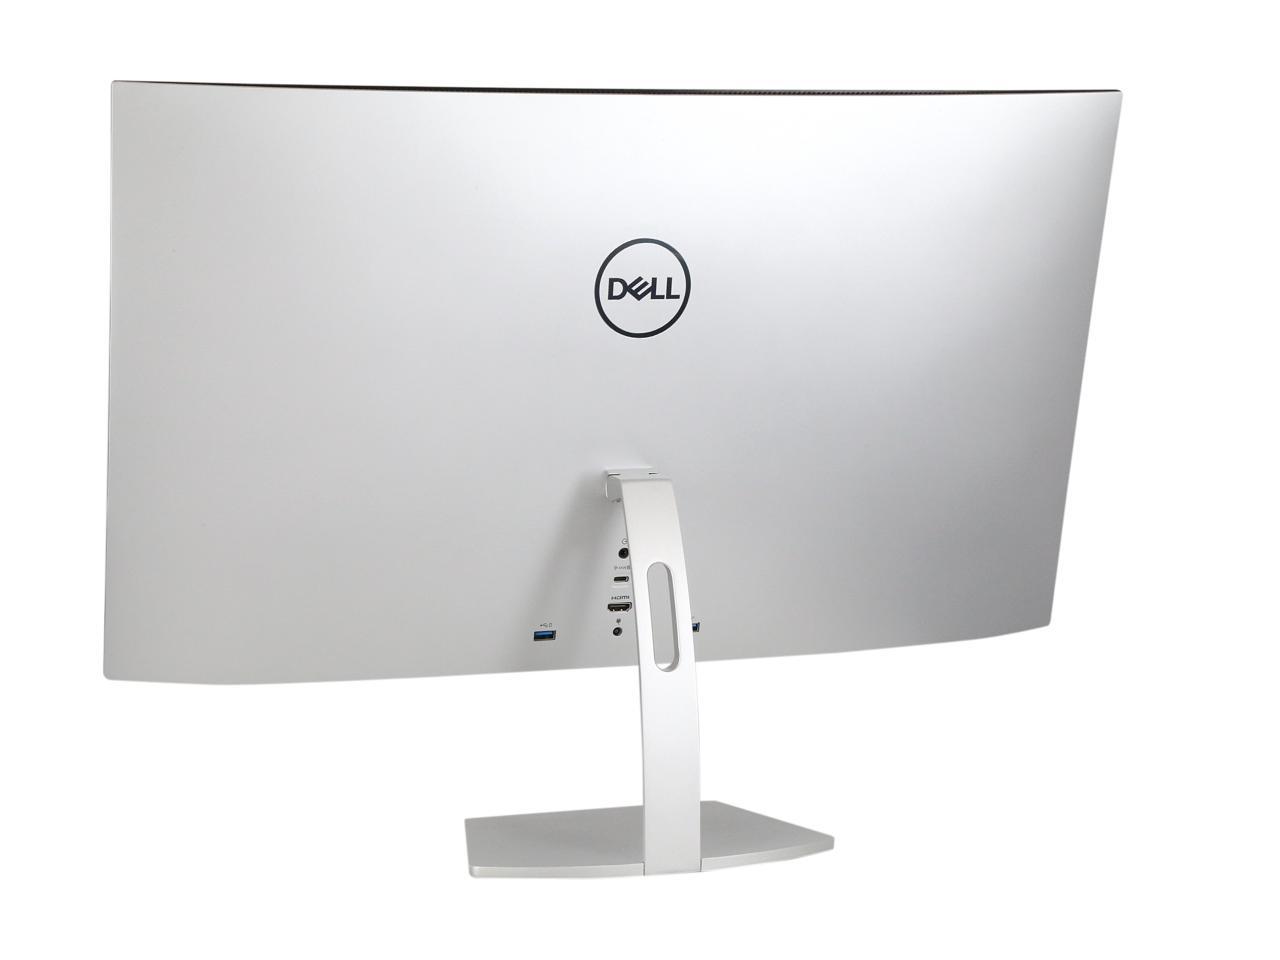 Dell S2719DC 2560 x 1440 60Hz LED Backlit IPS LCD Monitor